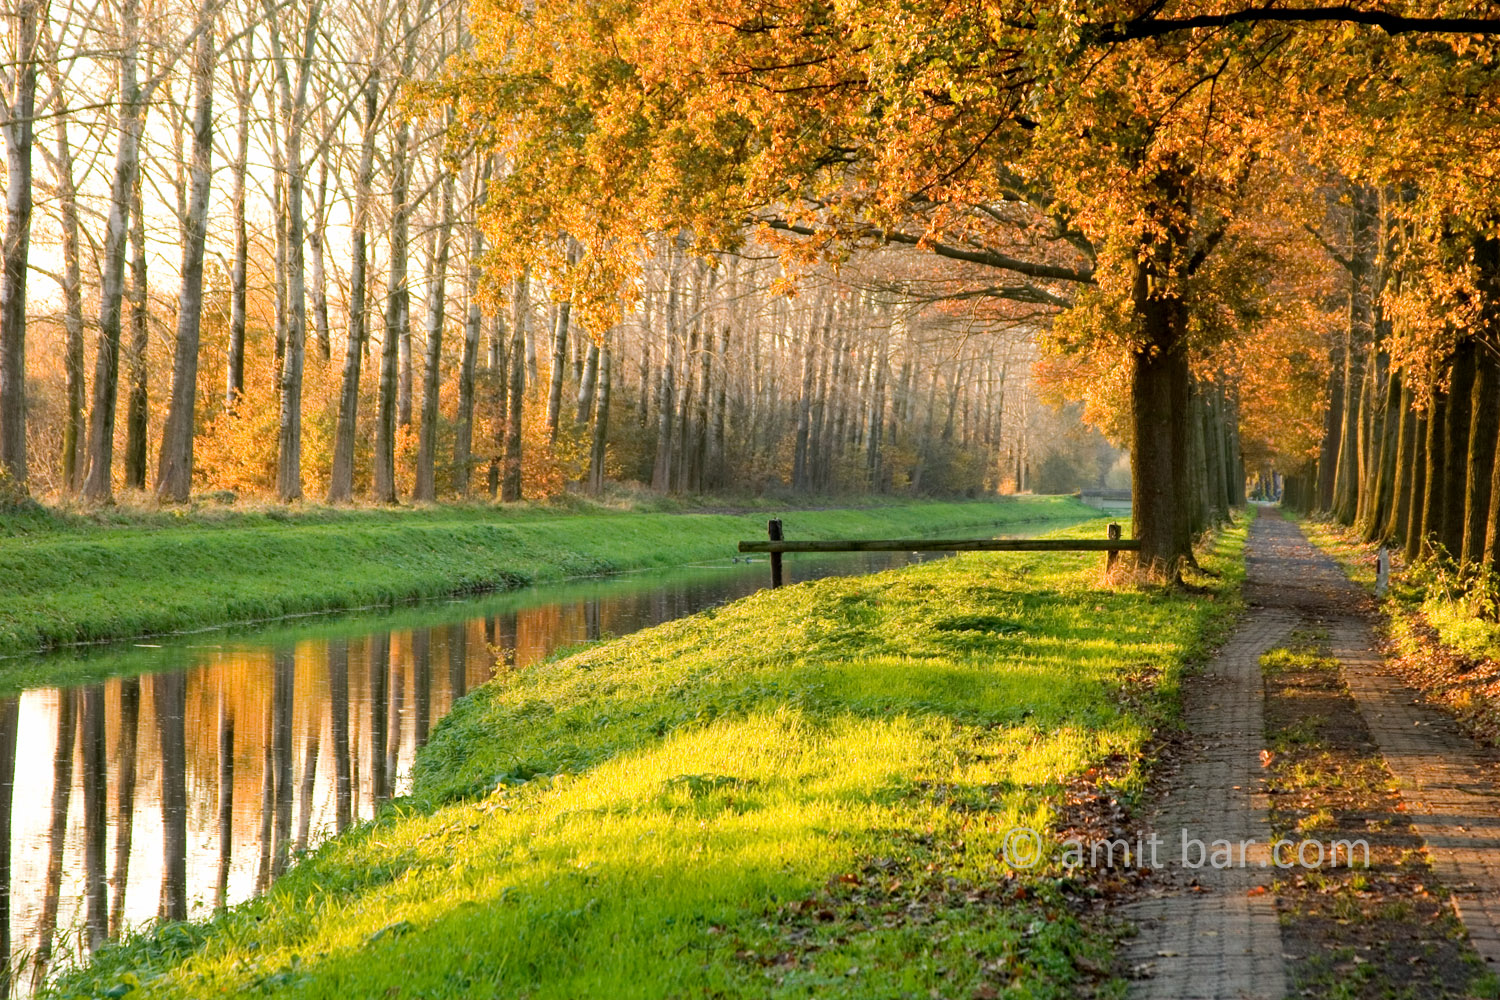 Autumn at the Slinge canal, Westendorp, The Netherlands